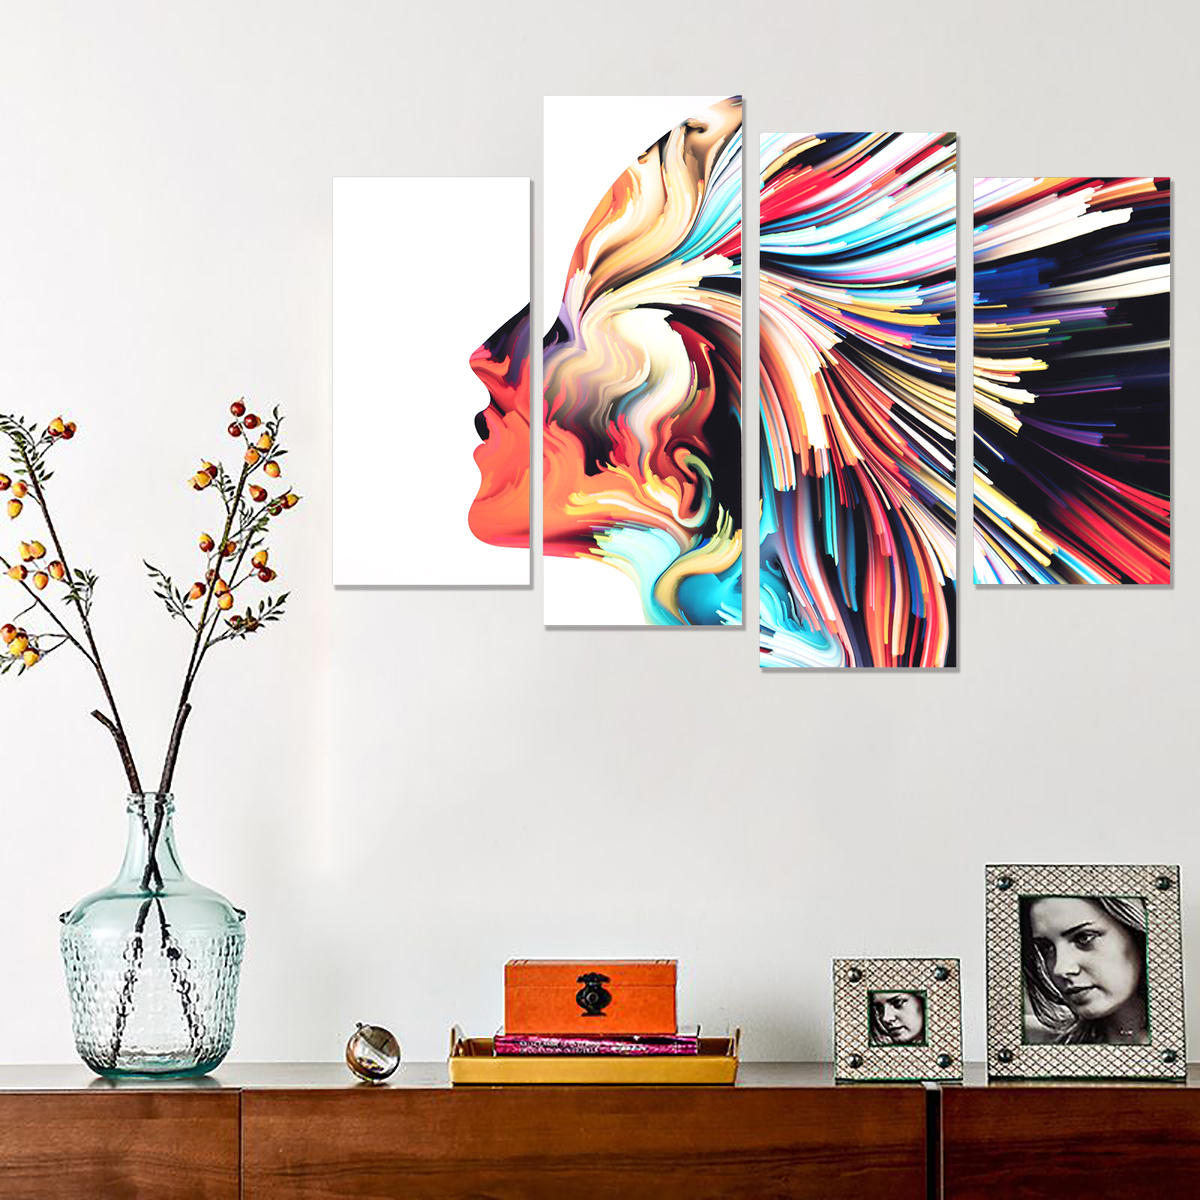 Art Home Decor : Our Thoughts On Pop Art Decor And Why Don T You Have It Yet / Explore urban outfitters collection of art and room decor, featuring the latest trends.